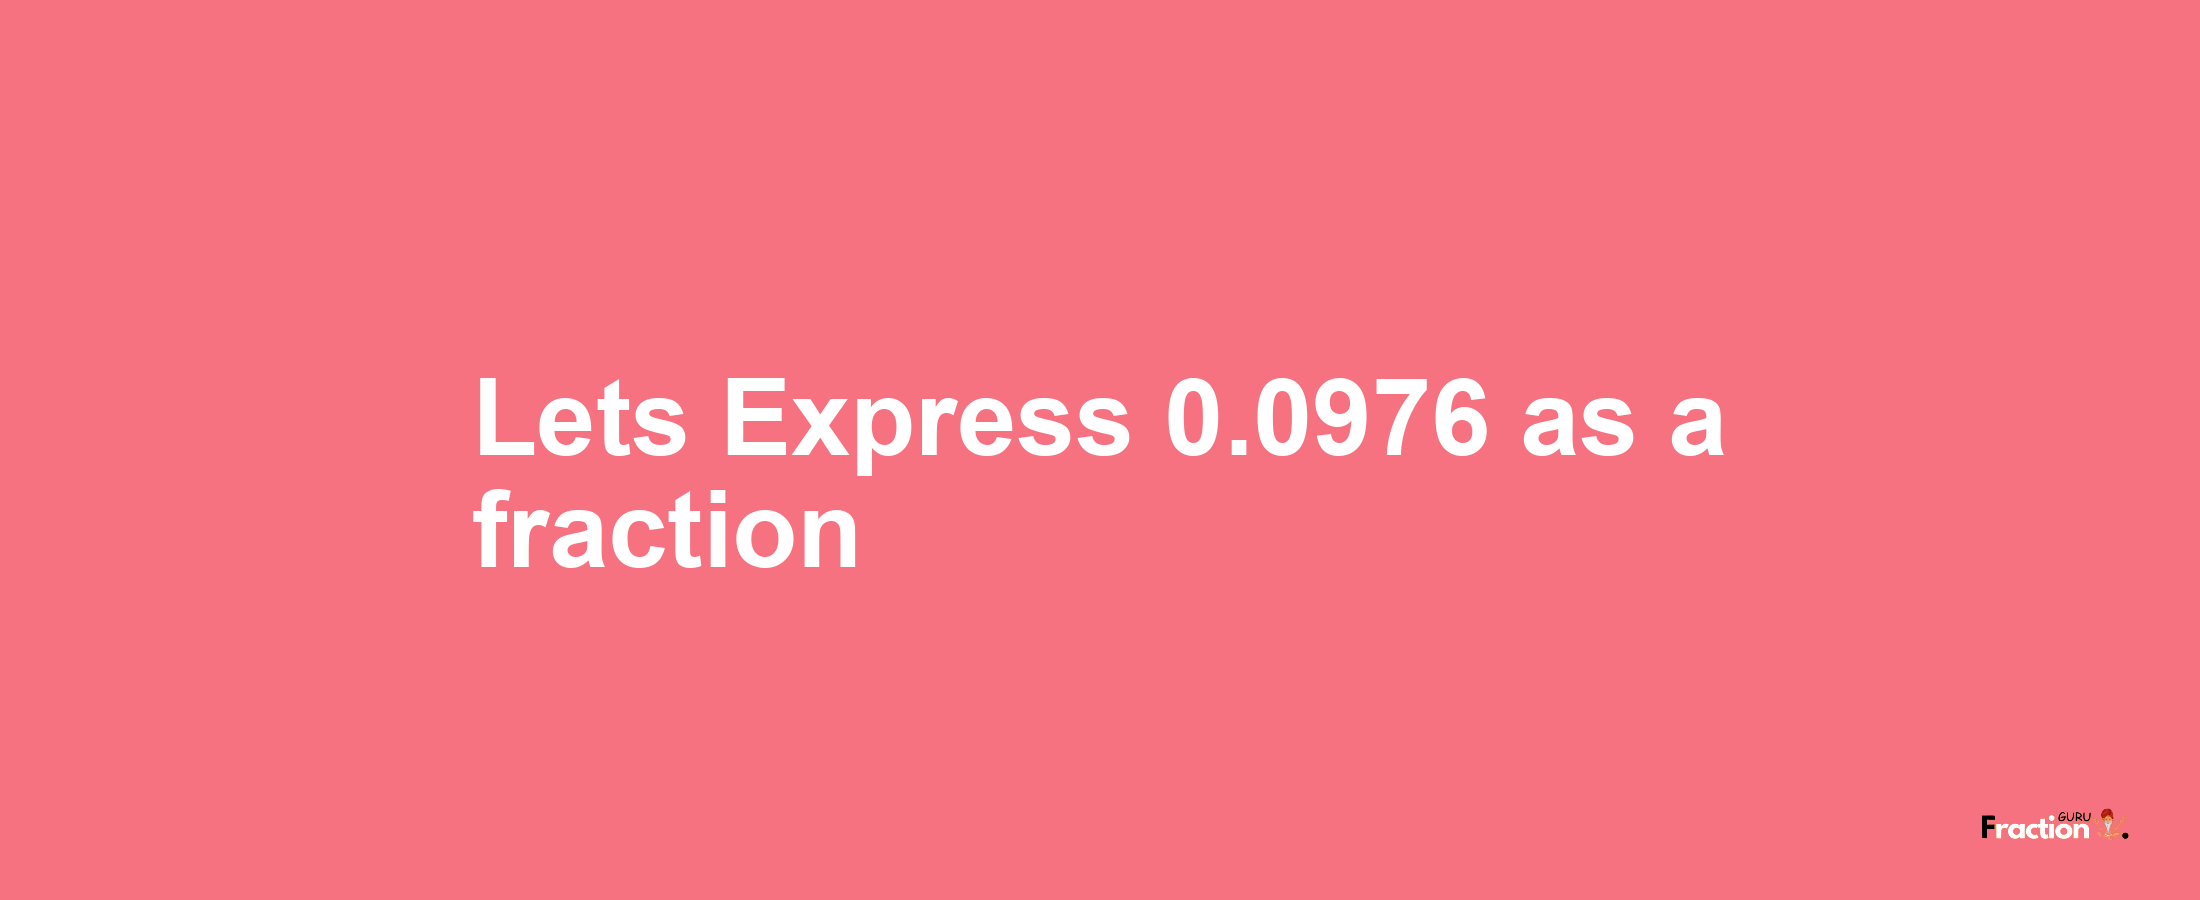 Lets Express 0.0976 as afraction